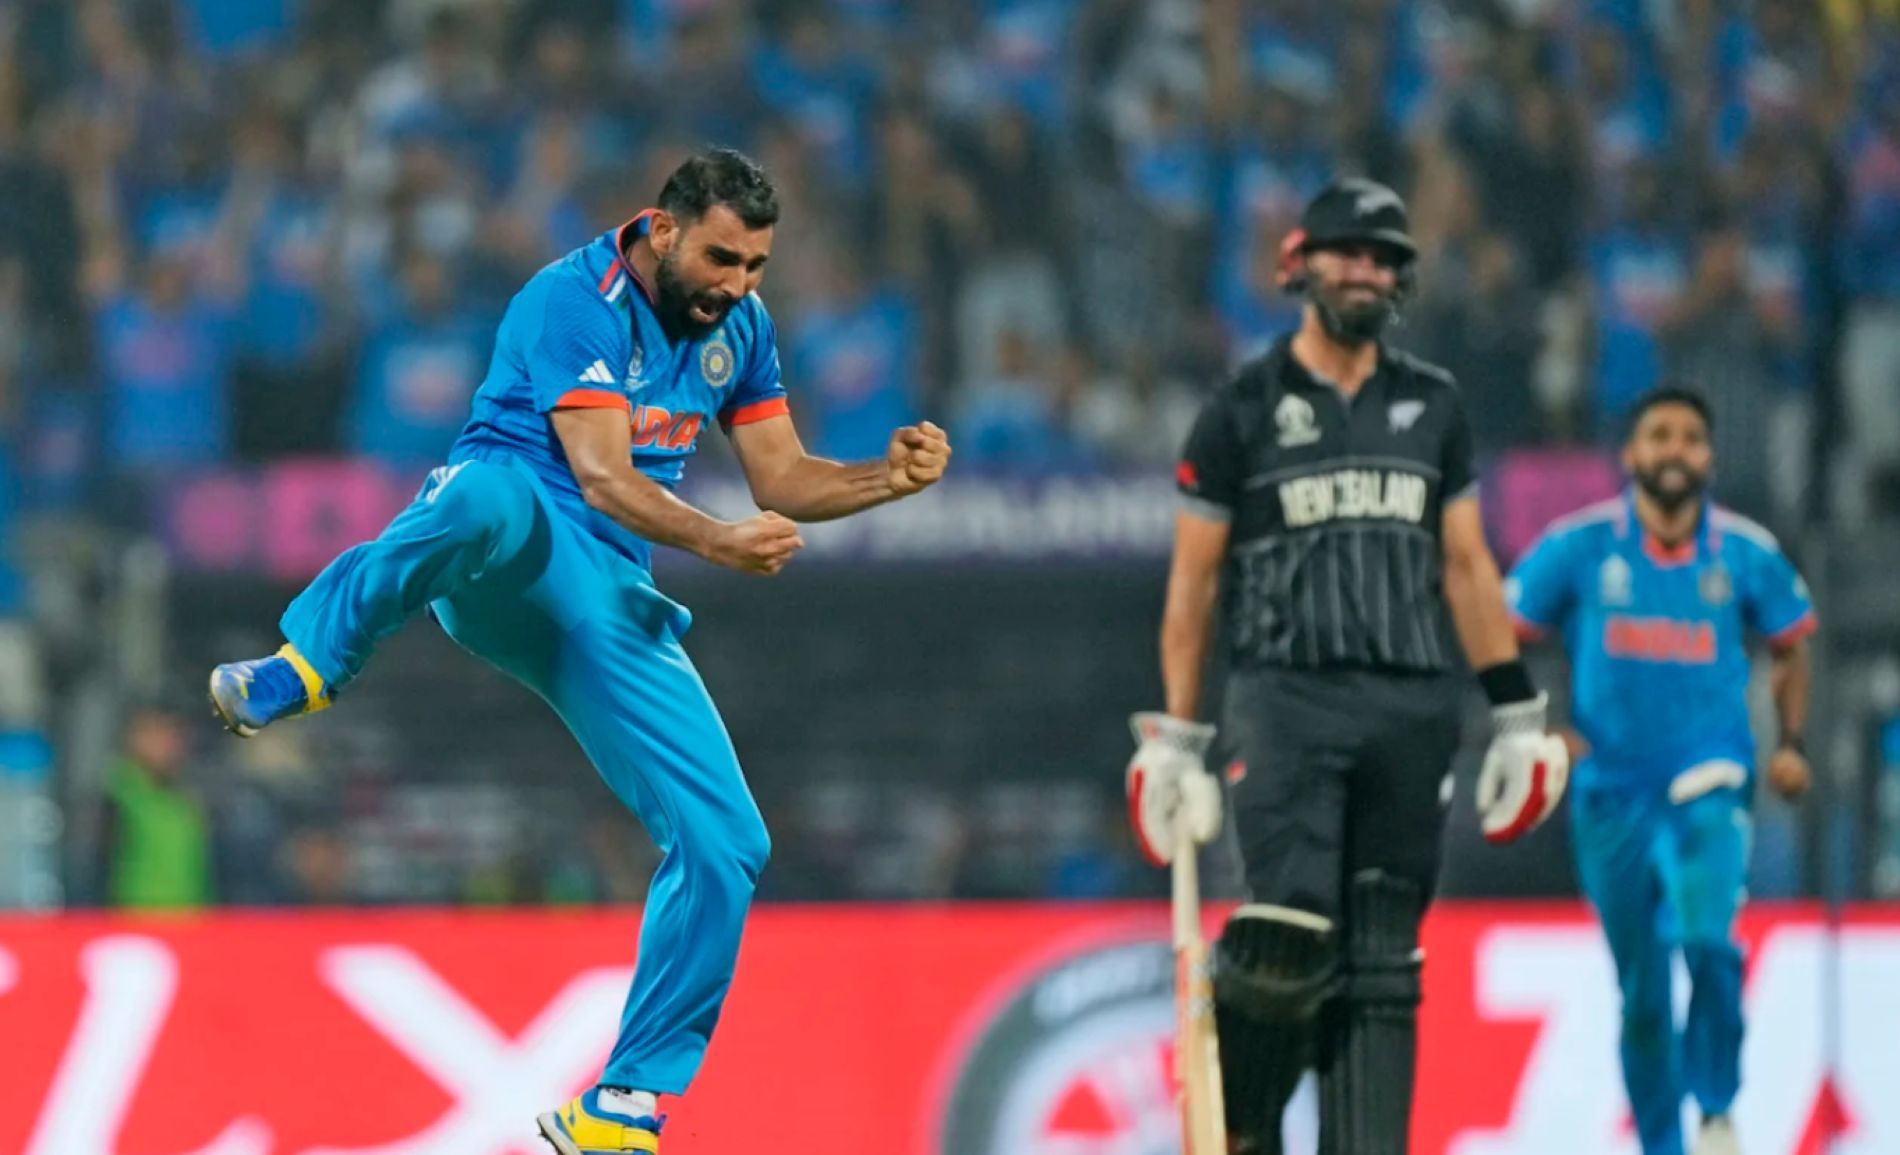 Shami continued his magical run in the World Cup